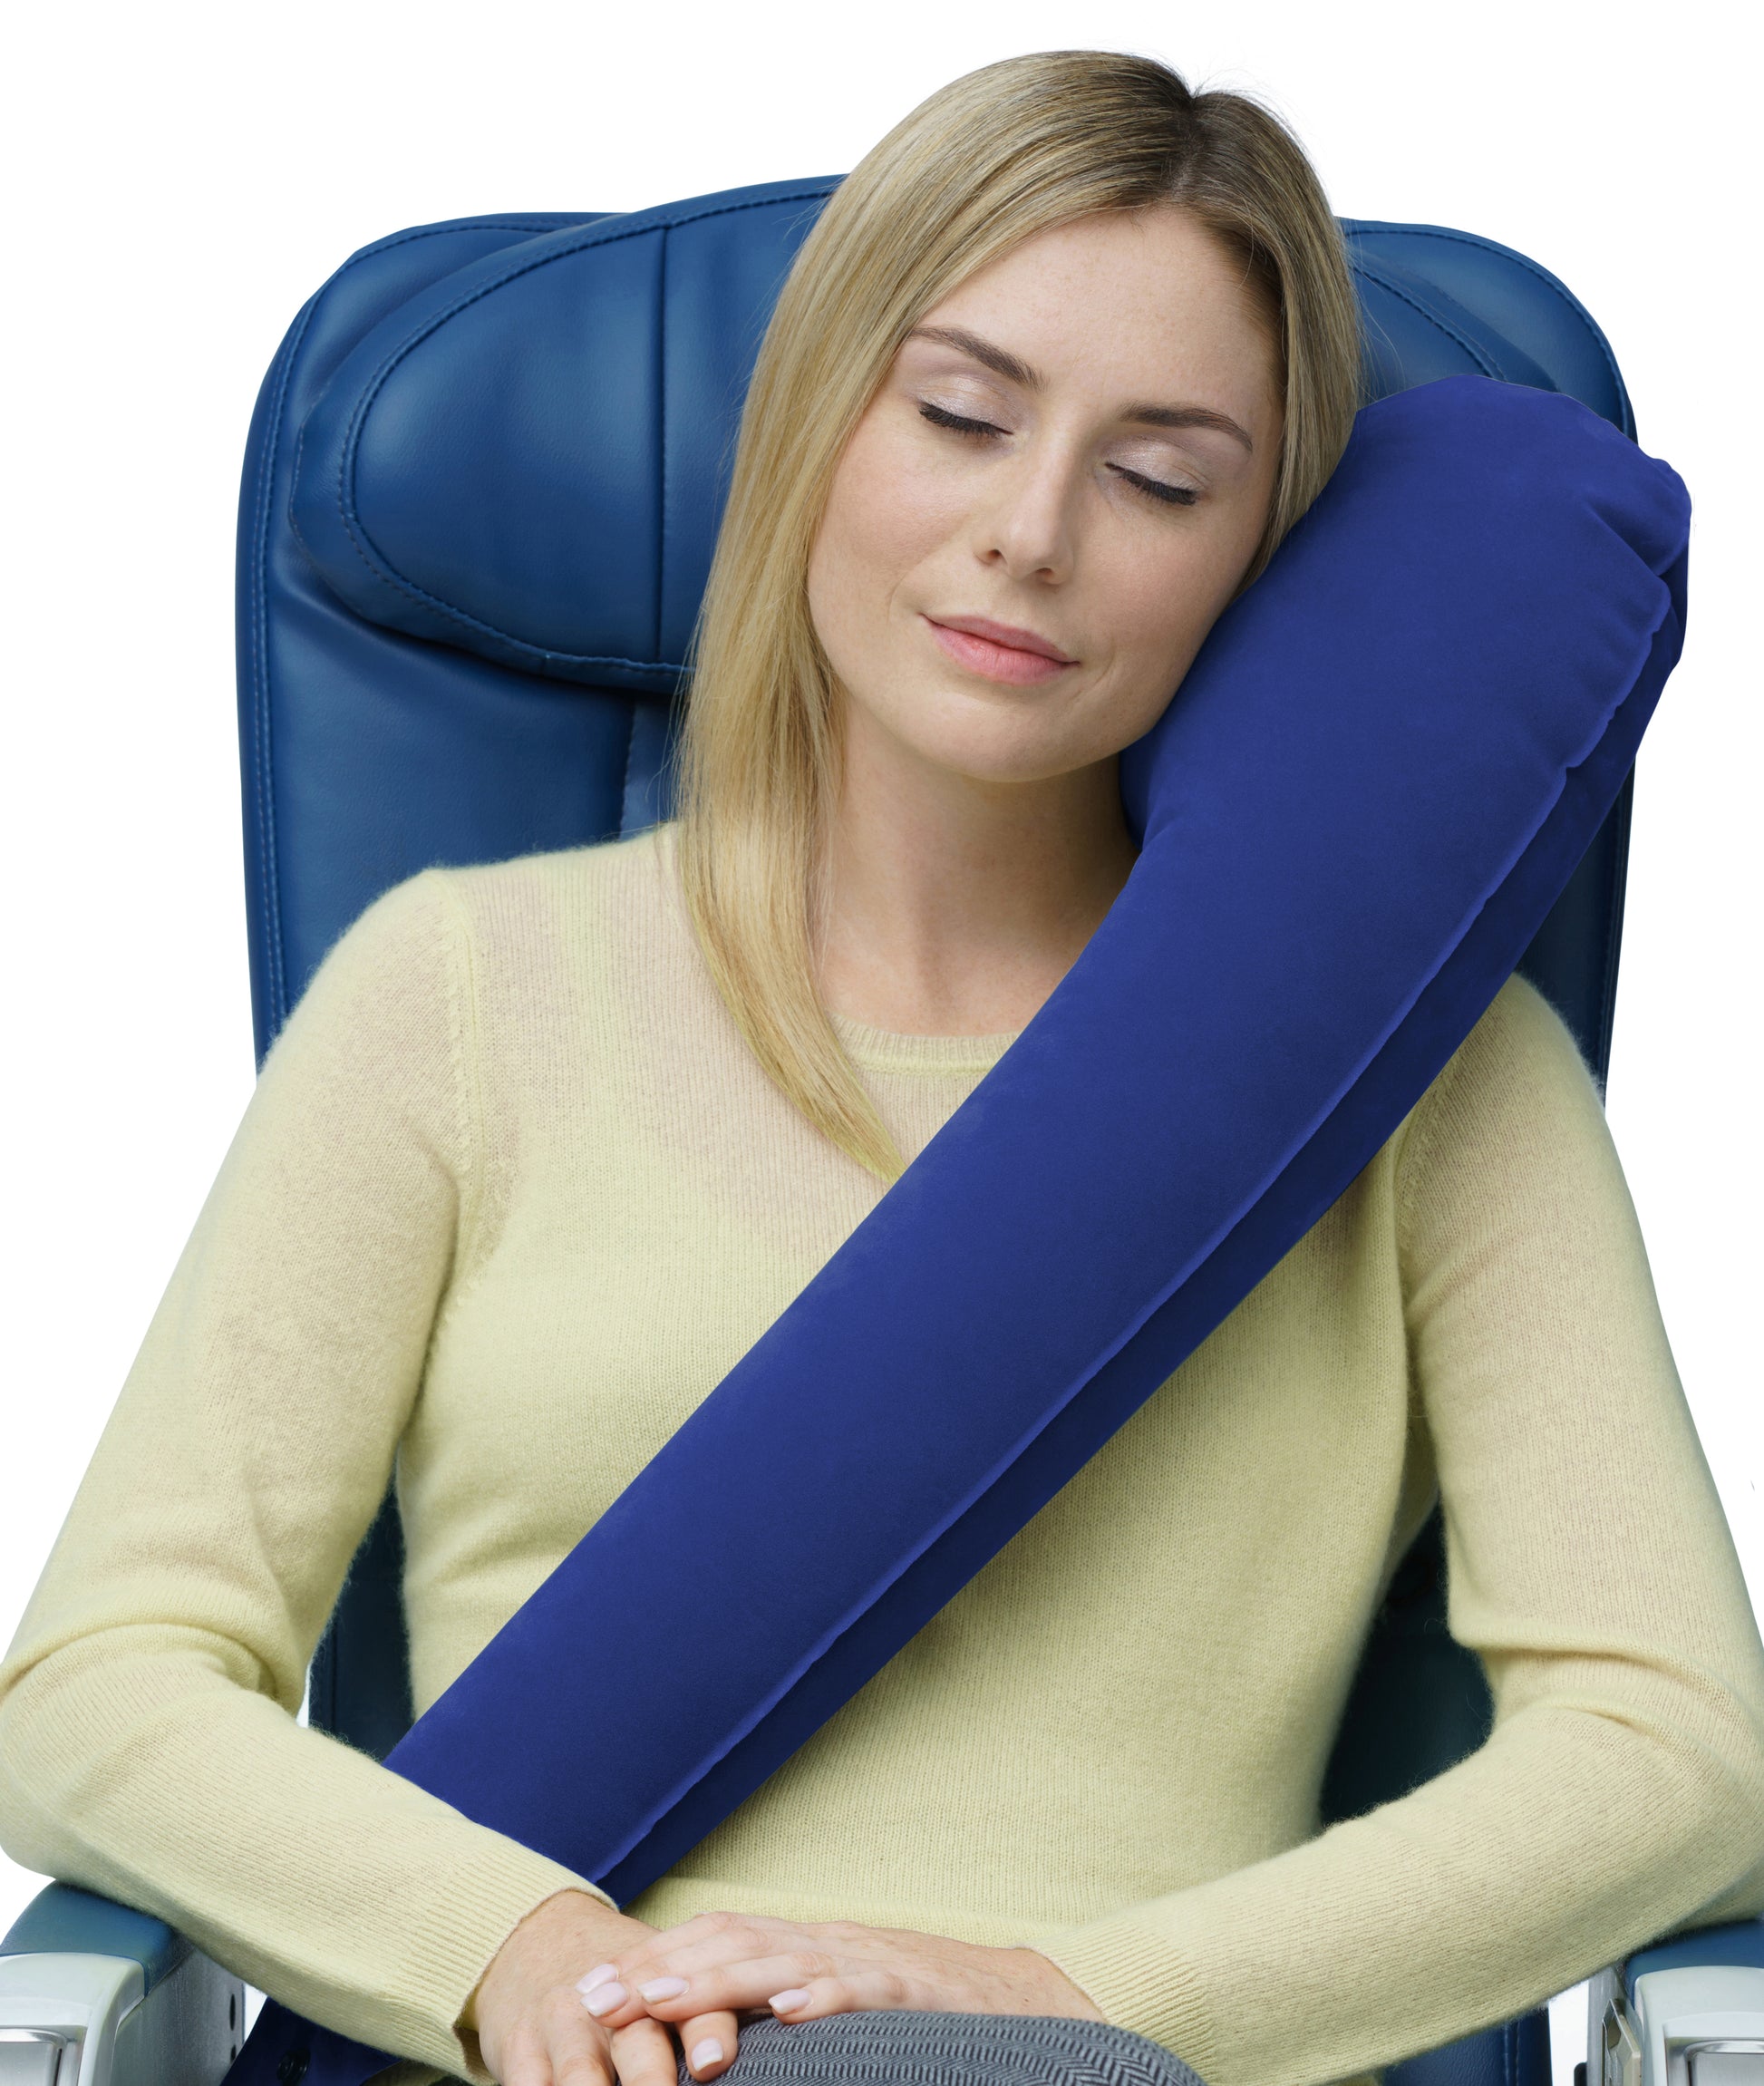 ultimate travel pillow